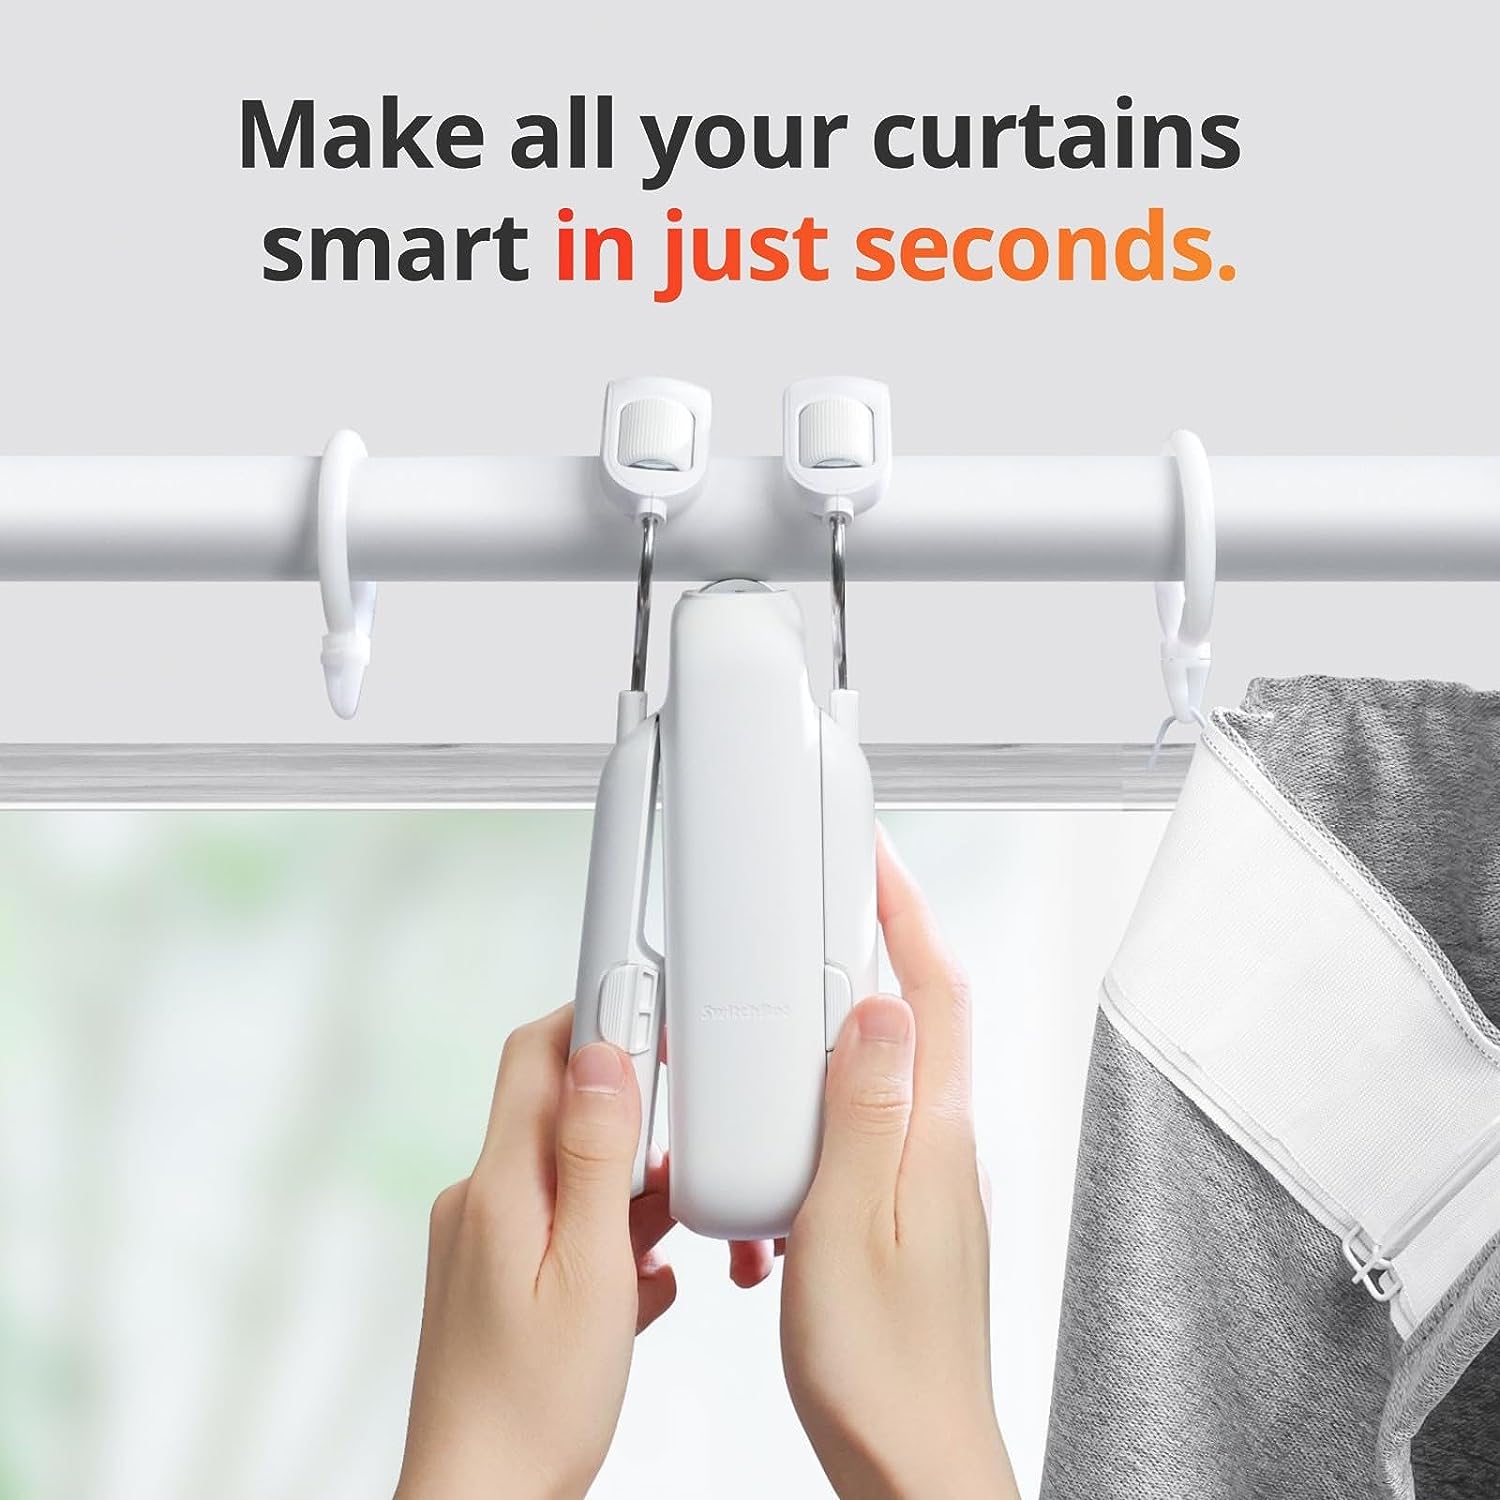 SwitchBot Smart Automatic Curtain Opener – Bluetooth Remote Control with App/Timer, Upgraded High-Performance Motor, Add Hub to Make it Work with Alexa, Google Home, HomeKit(Curtain 3,Rod)